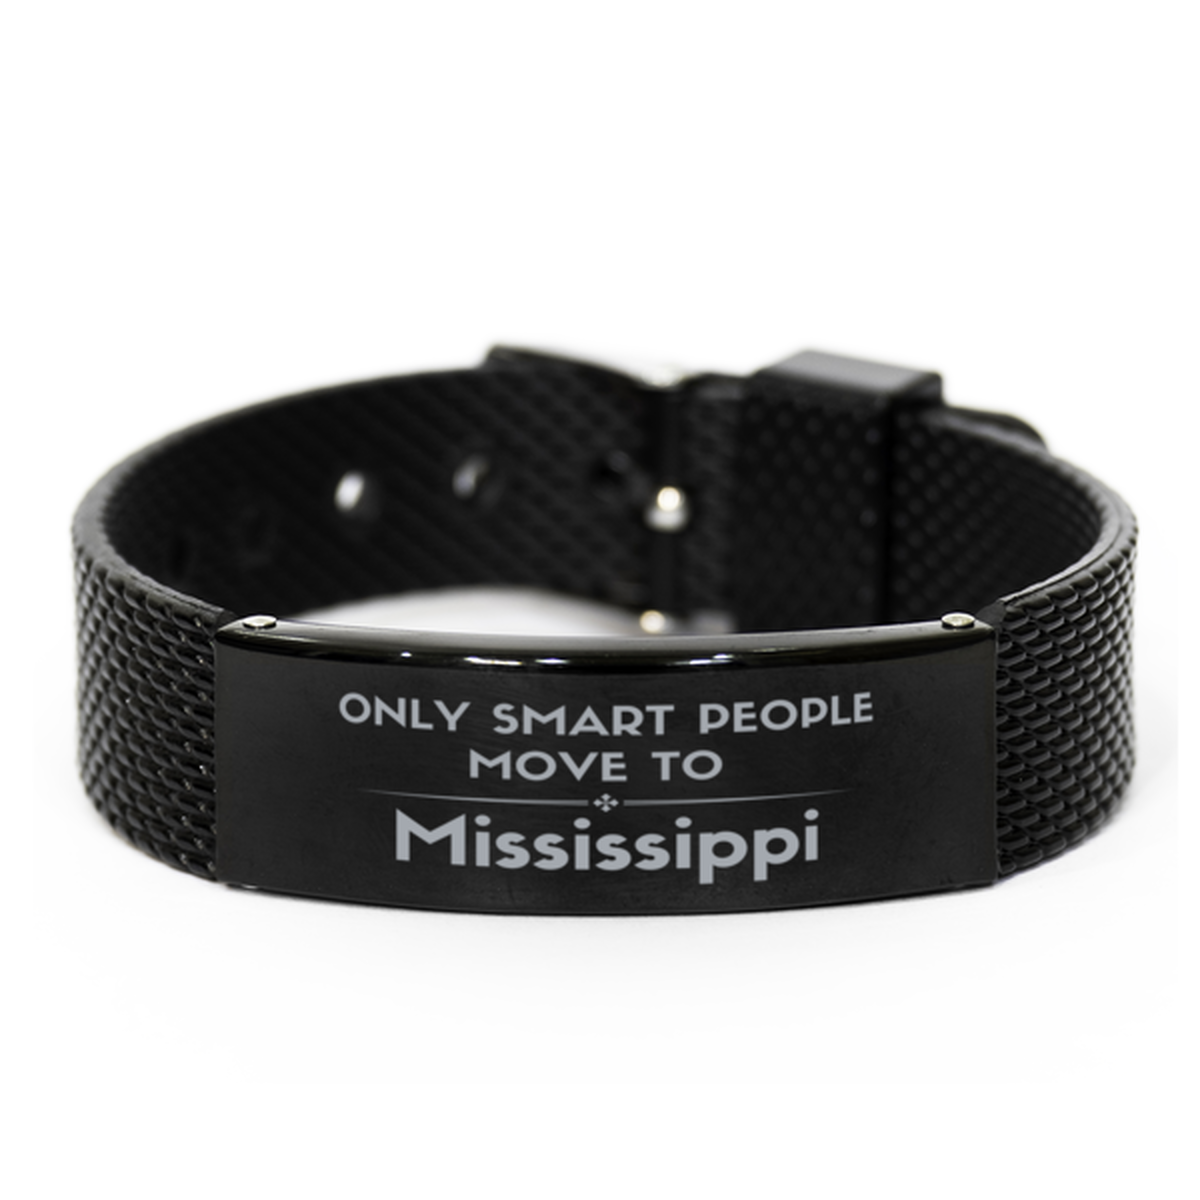 Only smart people move to Mississippi Black Shark Mesh Bracelet, Gag Gifts For Mississippi, Move to Mississippi Gifts for Friends Coworker Funny Saying Quote